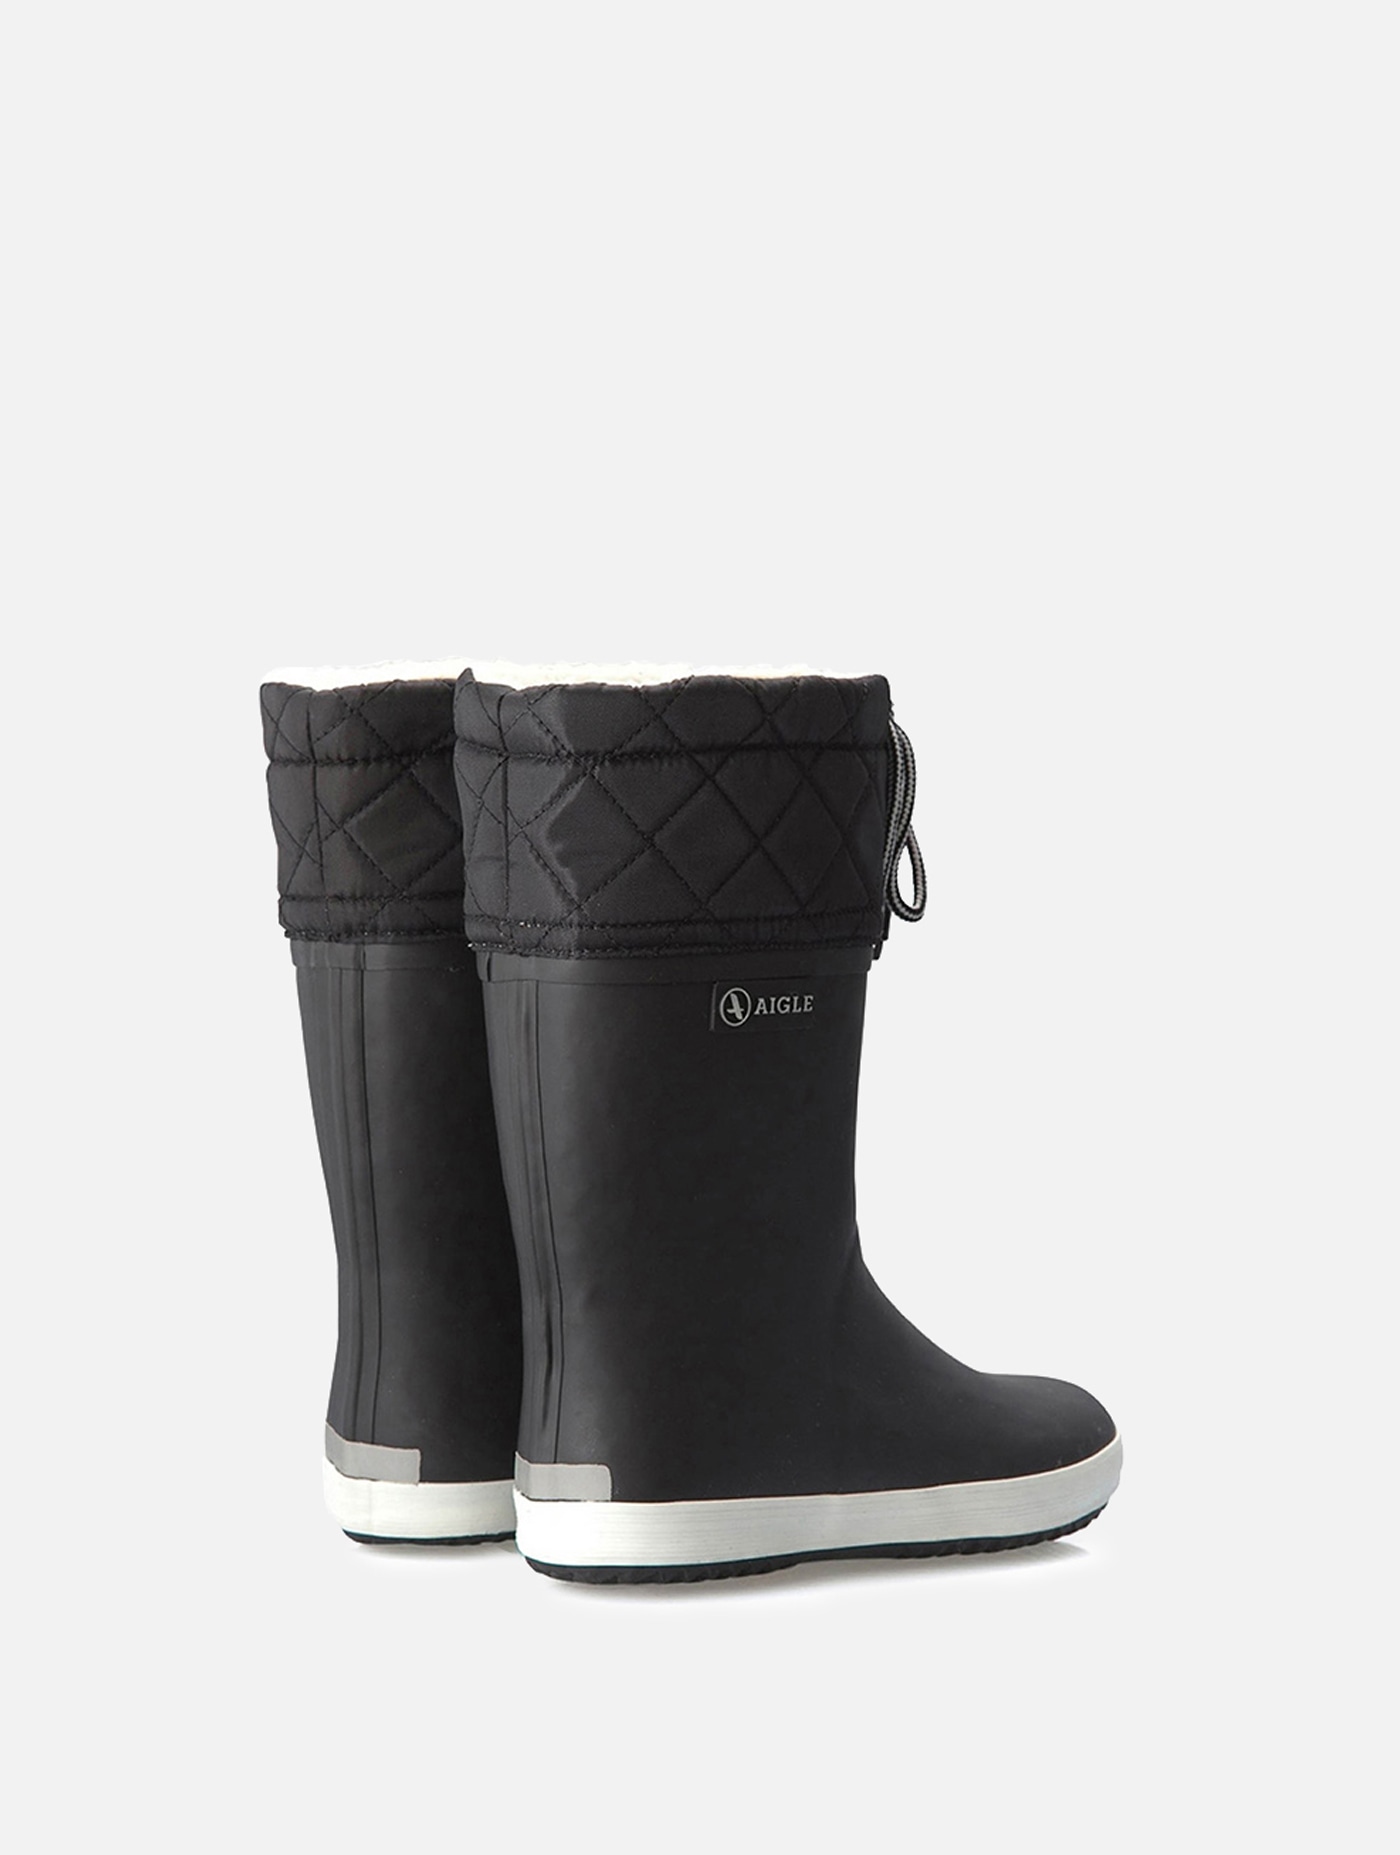 afsked Forinden sy Aigle - The fur-lined children's boot, ideal for cold weather Noir/blanc -  Giboulee | AIGLE